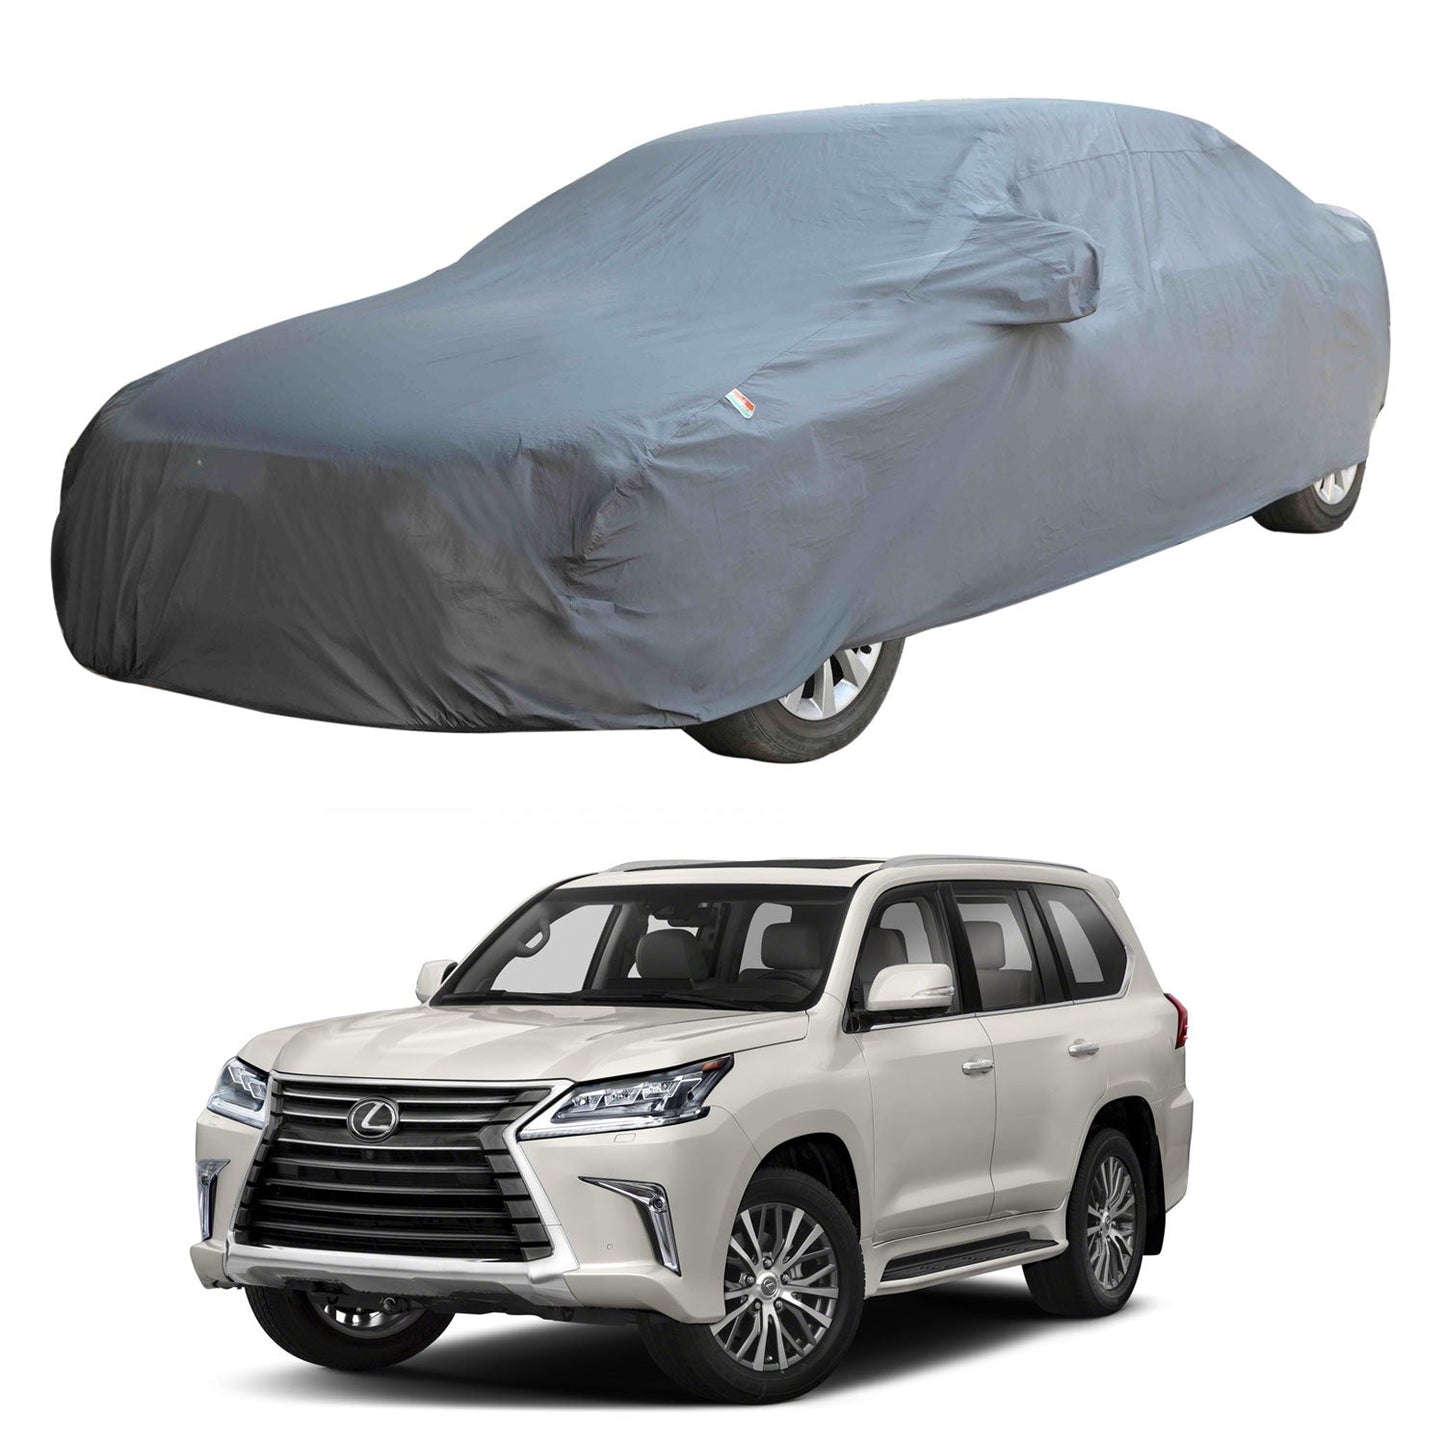 Oshotto Dark Grey 100% Anti Reflective, dustproof and Water Proof Car Body Cover with Mirror Pockets For Lexus LX 570